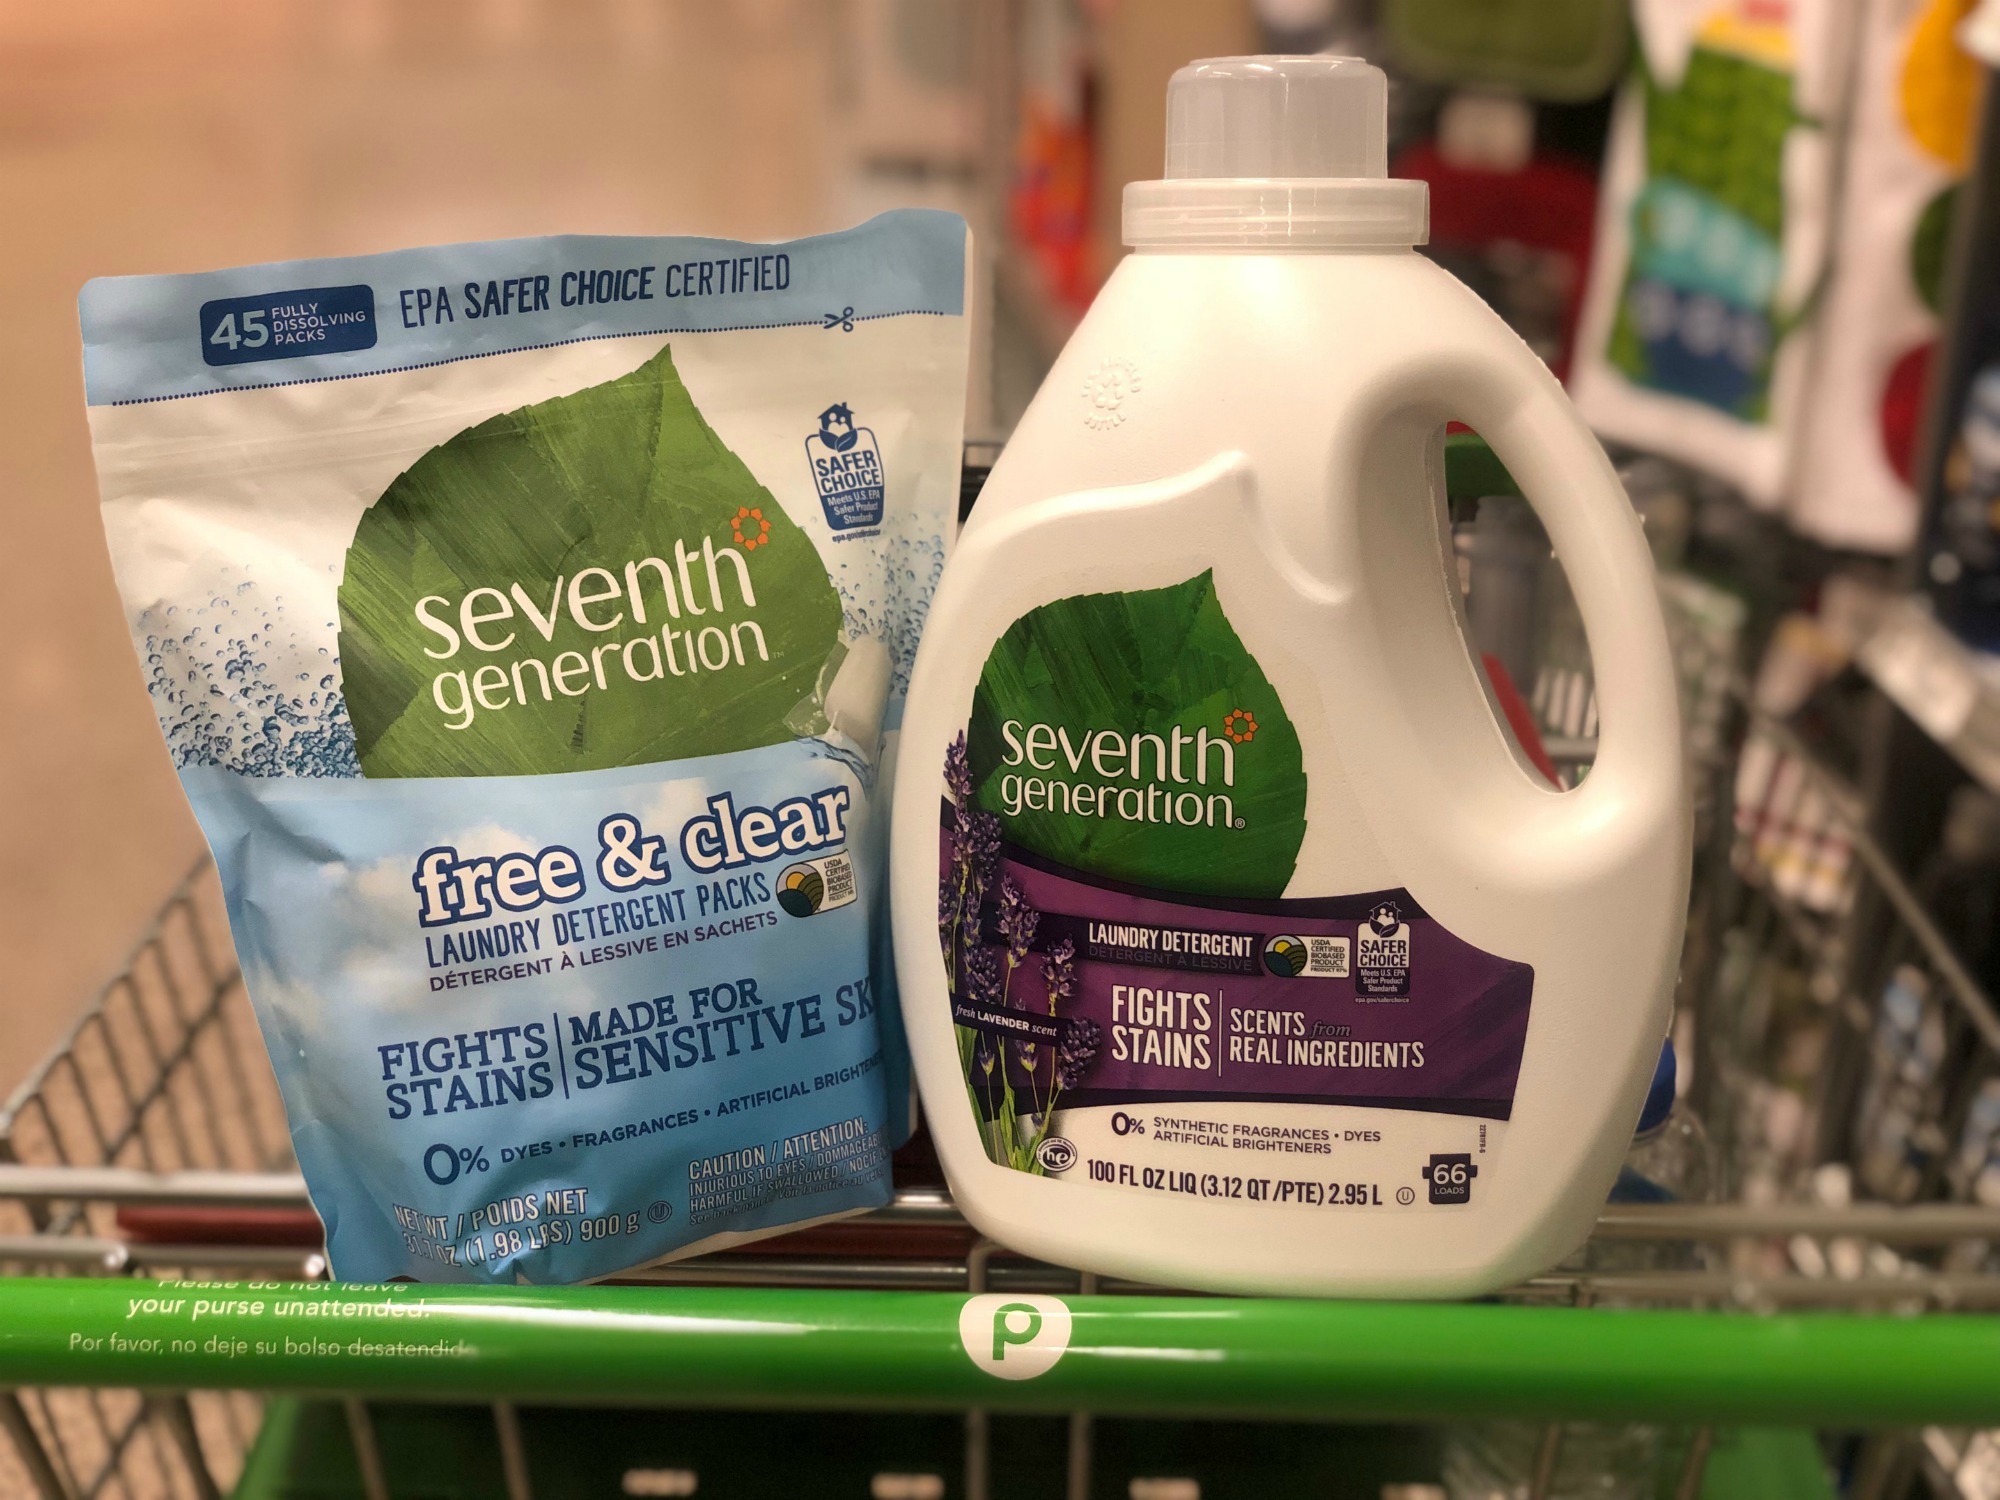 Last Chance To Use The Big $3 Seventh Generation Laundry Detergent - Save Through 4/19 At Your Local Publix 1